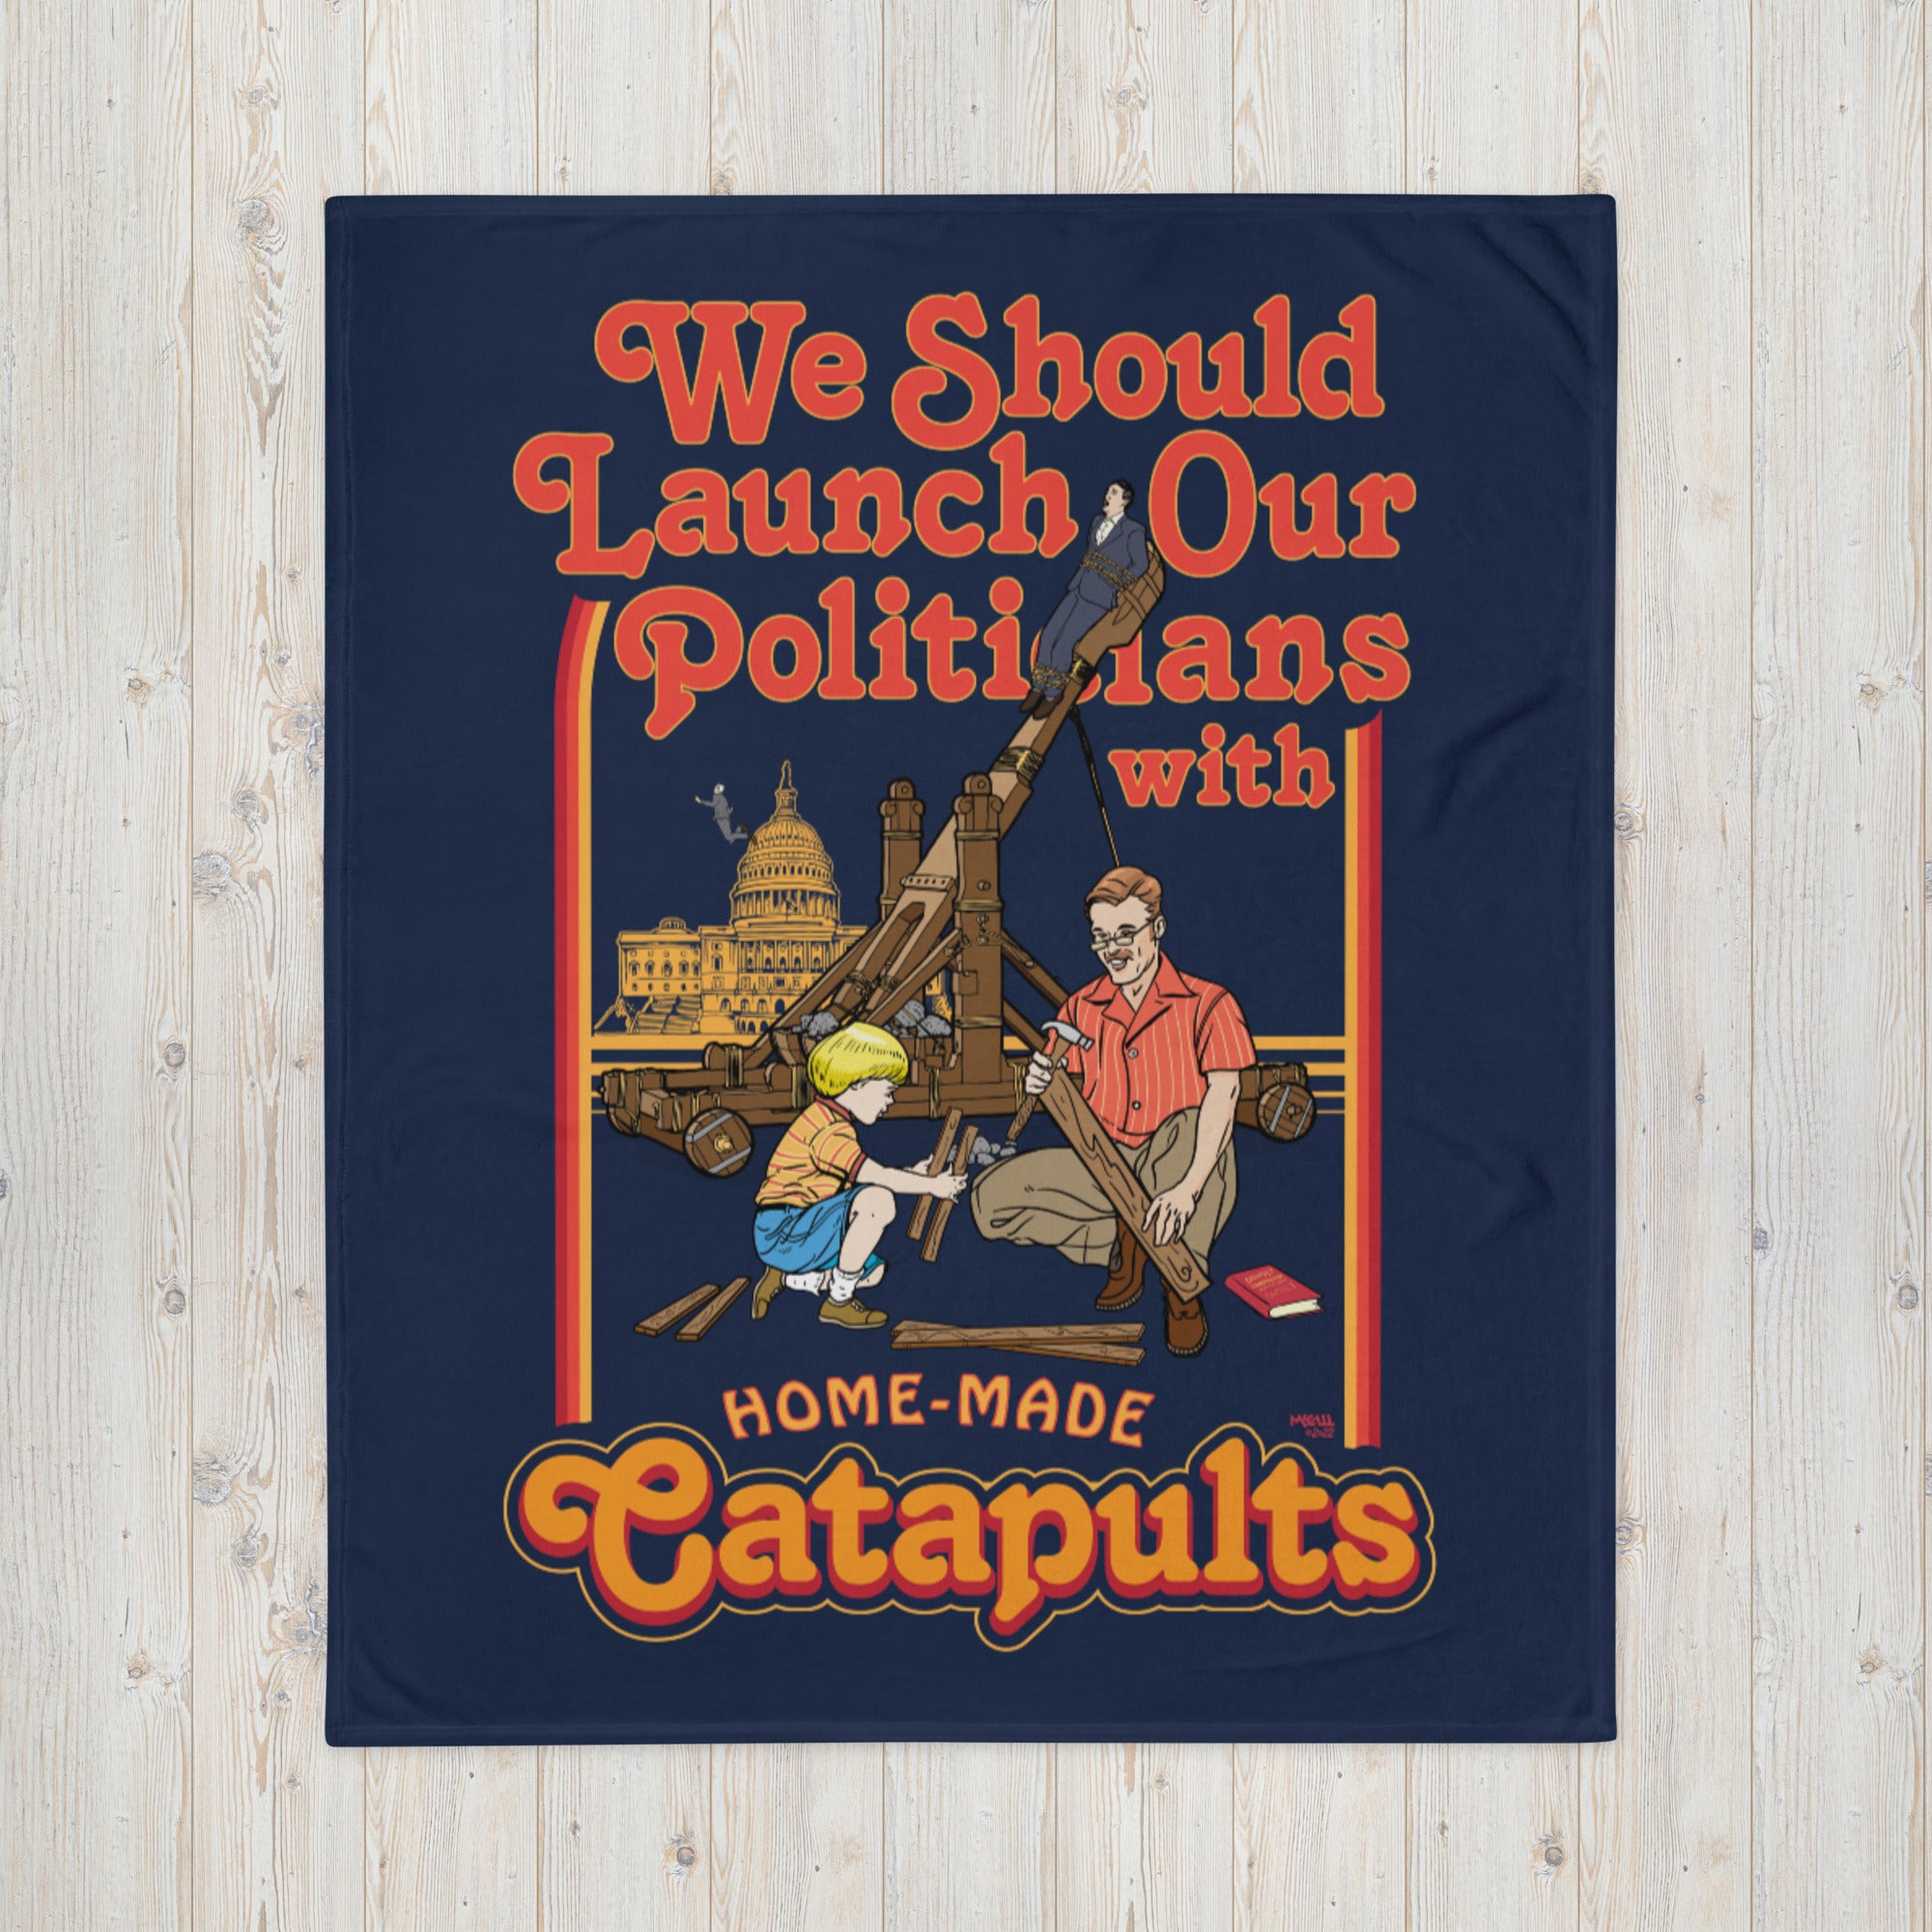 We Should Launch Our Politicians from Catapults Throw Blanket